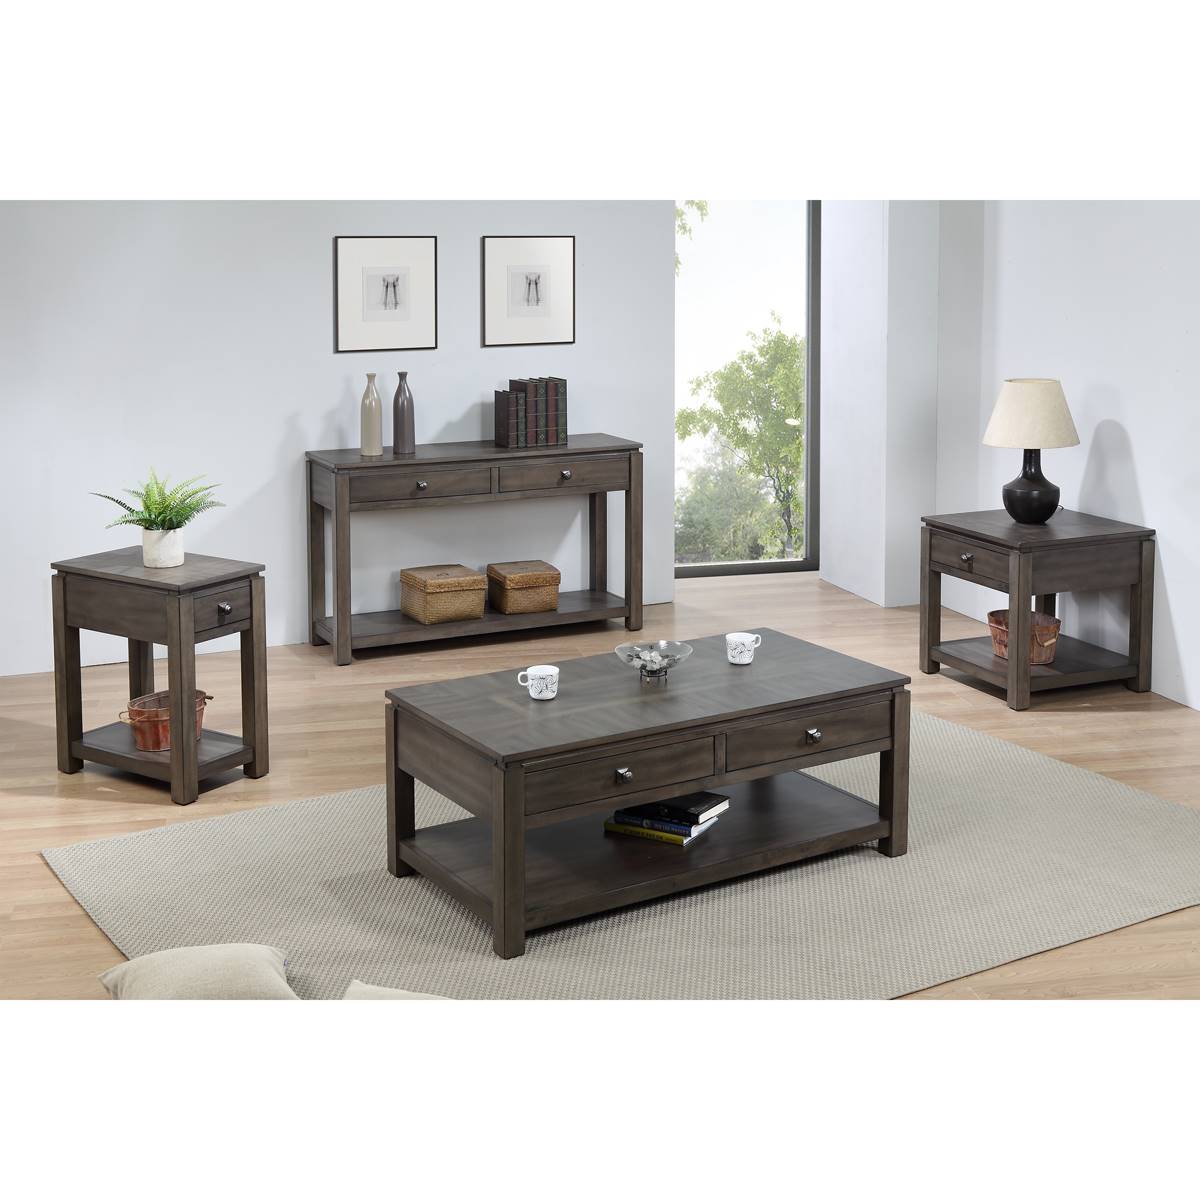 Besthom Weathered Square Solid Wood End Table With 1 Drawer